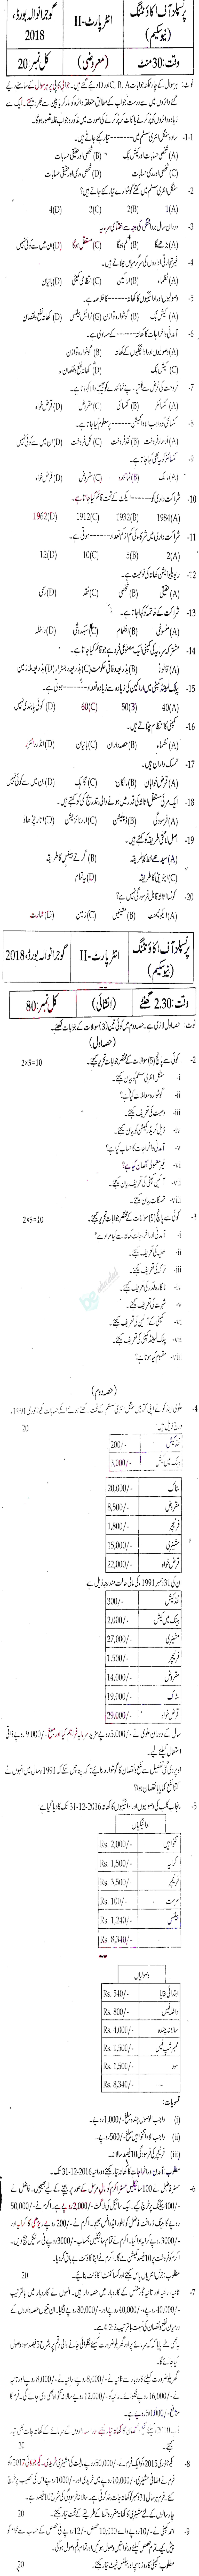 Principles of Accounting ICOM Part 2 Past Paper Group 2 BISE Gujranwala 2018